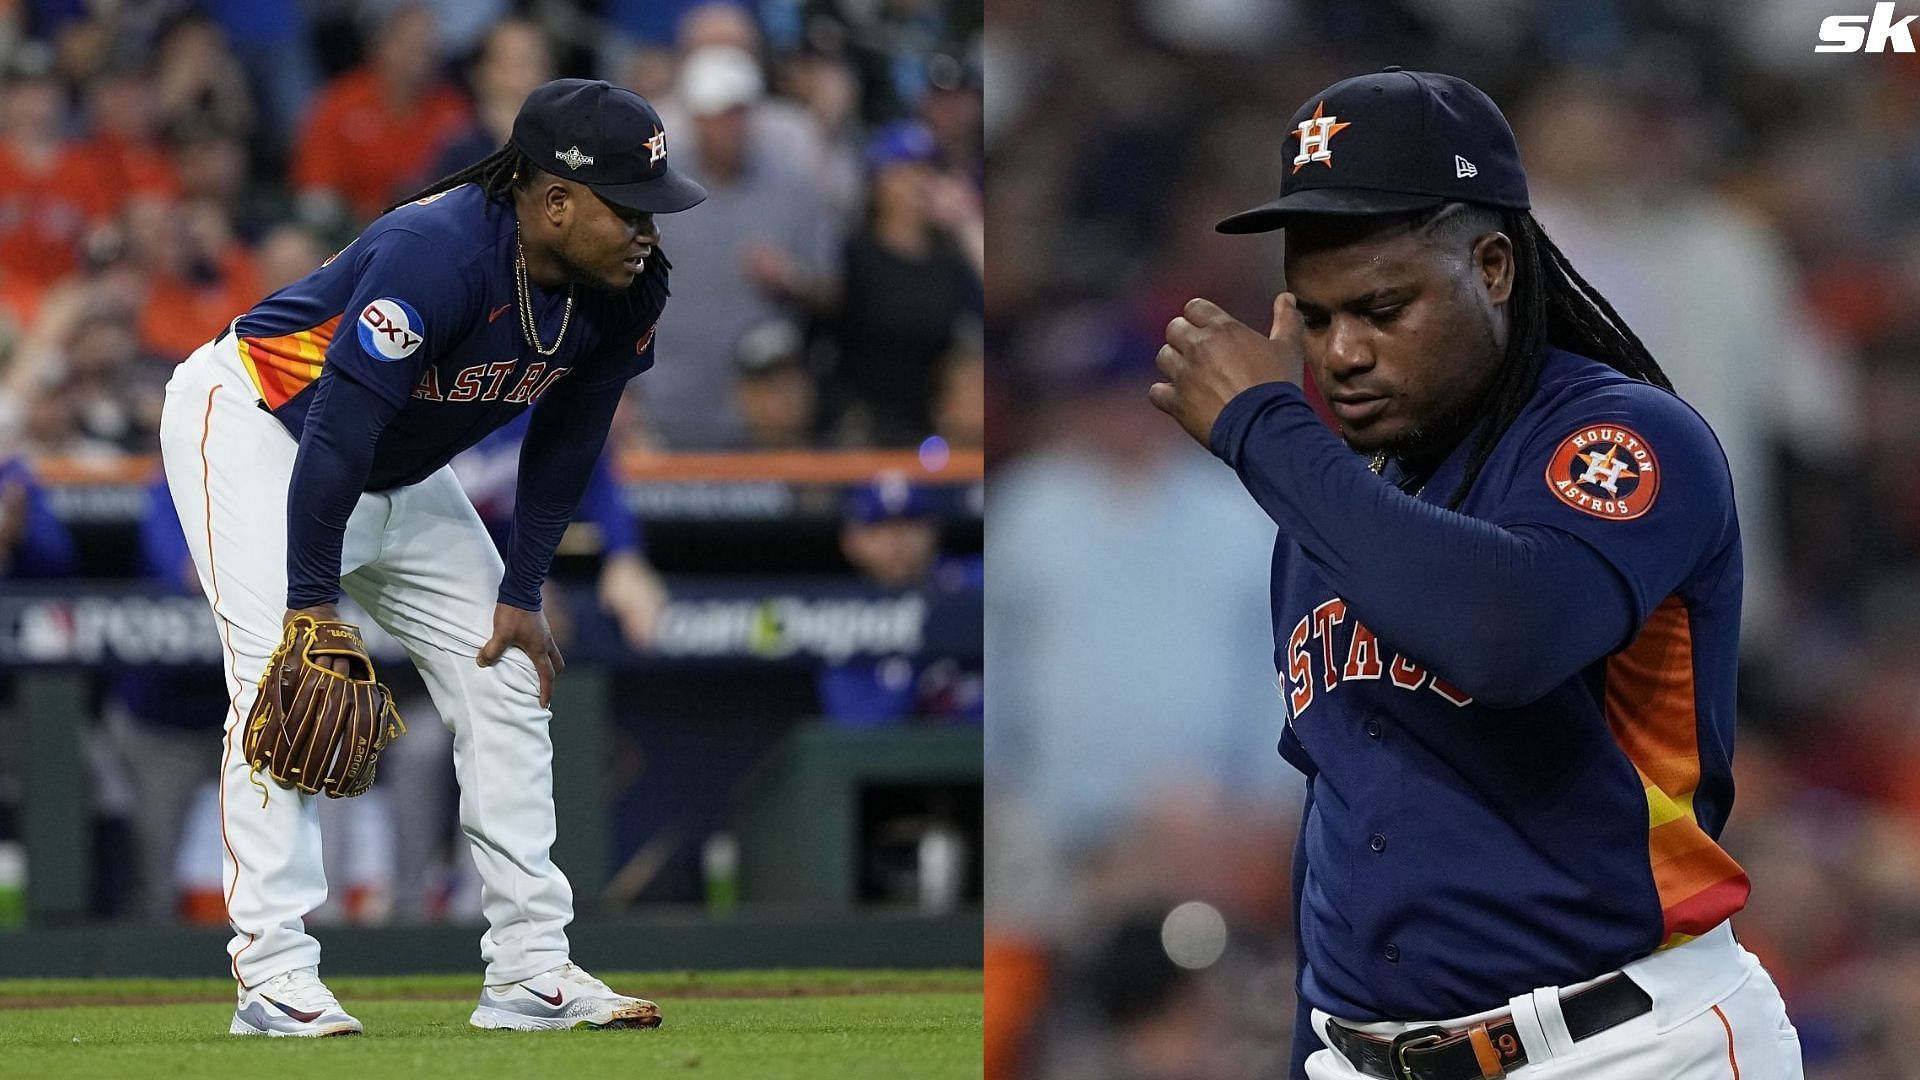 This jaw-dropping Framber Valdez stat bodes well for Astros in